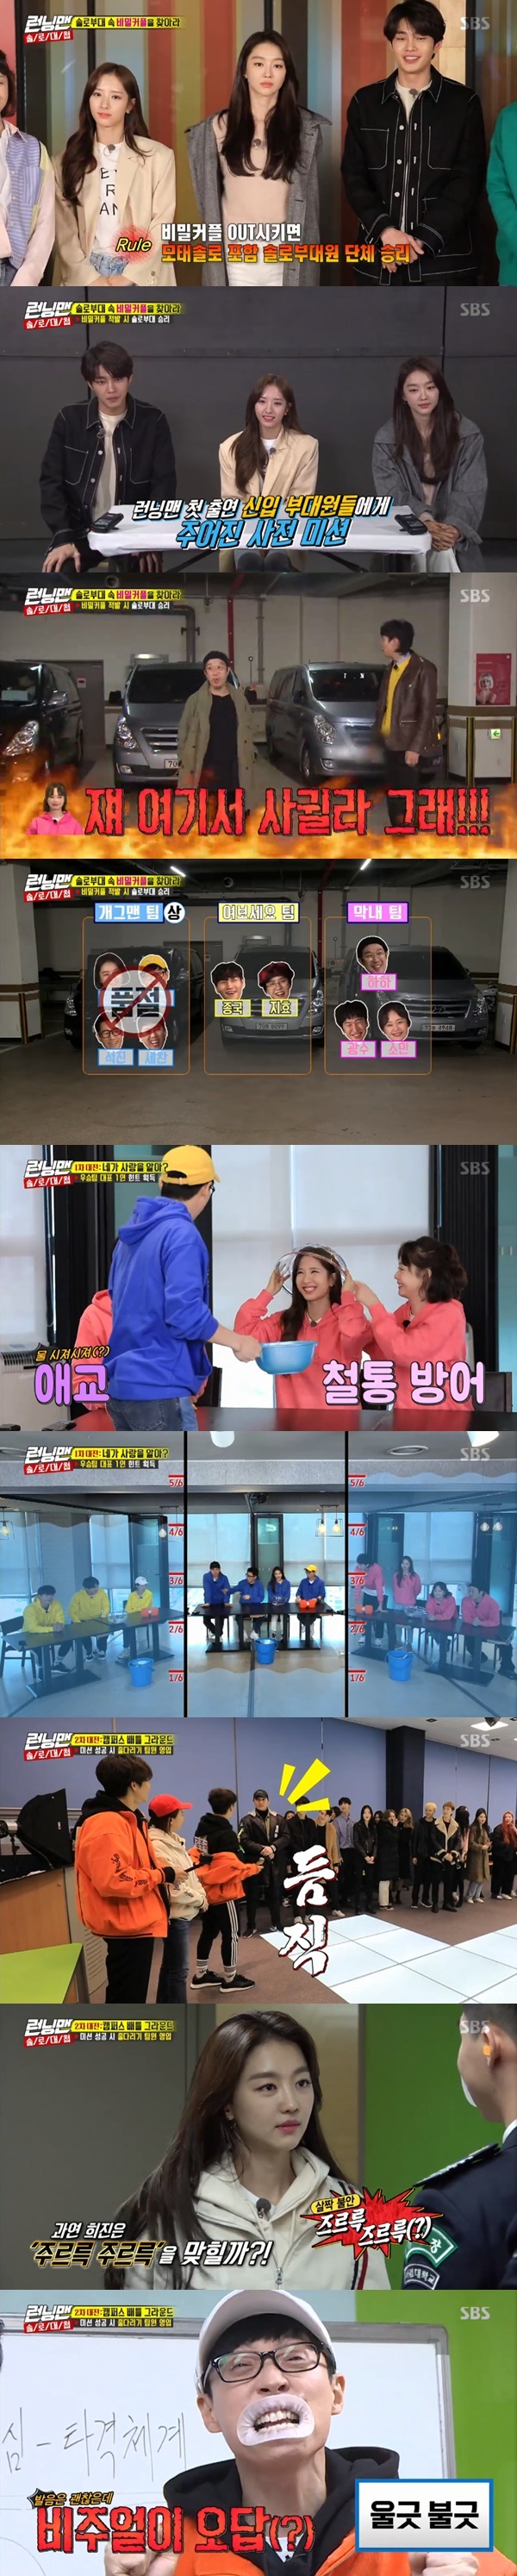 Seoul = = The comedian team, which includes Running Man Yoo Jae-Suk, succeeded in the first mission and Jang Hee-jin got a hint.On SBSs Running Man, which aired on the afternoon of the 31st, it was featured in a special feature Solos Counterattacks; guest stars include Jang Hee-jin, Jae-young Kim and Bona.In the solo race held on this day, there was a secret couple and a mother solo to reveal their identity.Solo units, which included Motae Solo, had to find secret couples, and secret couples had to find Motae Solo.Three people who appeared as guests were given a pre-mission.With the meal ticket acquired depending on the success of the mission, Jang Hee-jin and Jae-young Kim won the upper meal ticket and Bona won the lower meal ticket.The Running Man members were then decided to board the member car that the guest wanted when the vehicle was selected.Jang Hee-jin teamed up with Yoo Jae-Suk and Ji Suk-jin with Jeon So-min and Haha and Lee Kwang-soo with Bona.Jae-young Kim then teamed up with Song Ji-hyo and Kim Jong-kook.The first mission with hints was a game where you heard love-related quizzes and got the right answer: the two teams that lost the quiz had to be punished for the water.In the first mission, the Yoo Jae-Suk team, which Jang Hee-jin belongs to, won the championship.The defeated Haha team and Kim Jong-kook team came to the game to drive the water-pump penalty.Jeon So-min hit the right answer and had to be penalised by the Kim Jong-kook team; Song Ji-hyo was suspected of being a secret couple, repeating a ridiculous mistake in the penalty.In the Yoo Jae-Suk team, hints were provided only to Jang Hee-jin, who won the scissors rock.The second mission was a triangular tug of war with students, and only if they succeeded in the mission in the roulette could they get to the students.Members who succeeded in different missions were invited to the students in the designated department.Solo Race continued with only one hint being offered.Meanwhile, Running Man is a program that solves the missions of the best South Korean entertainers everywhere, and reveals the hidden back of the South Korean landmarks through constant racing and tense confrontation.It airs every Sunday at 4:50 p.m.